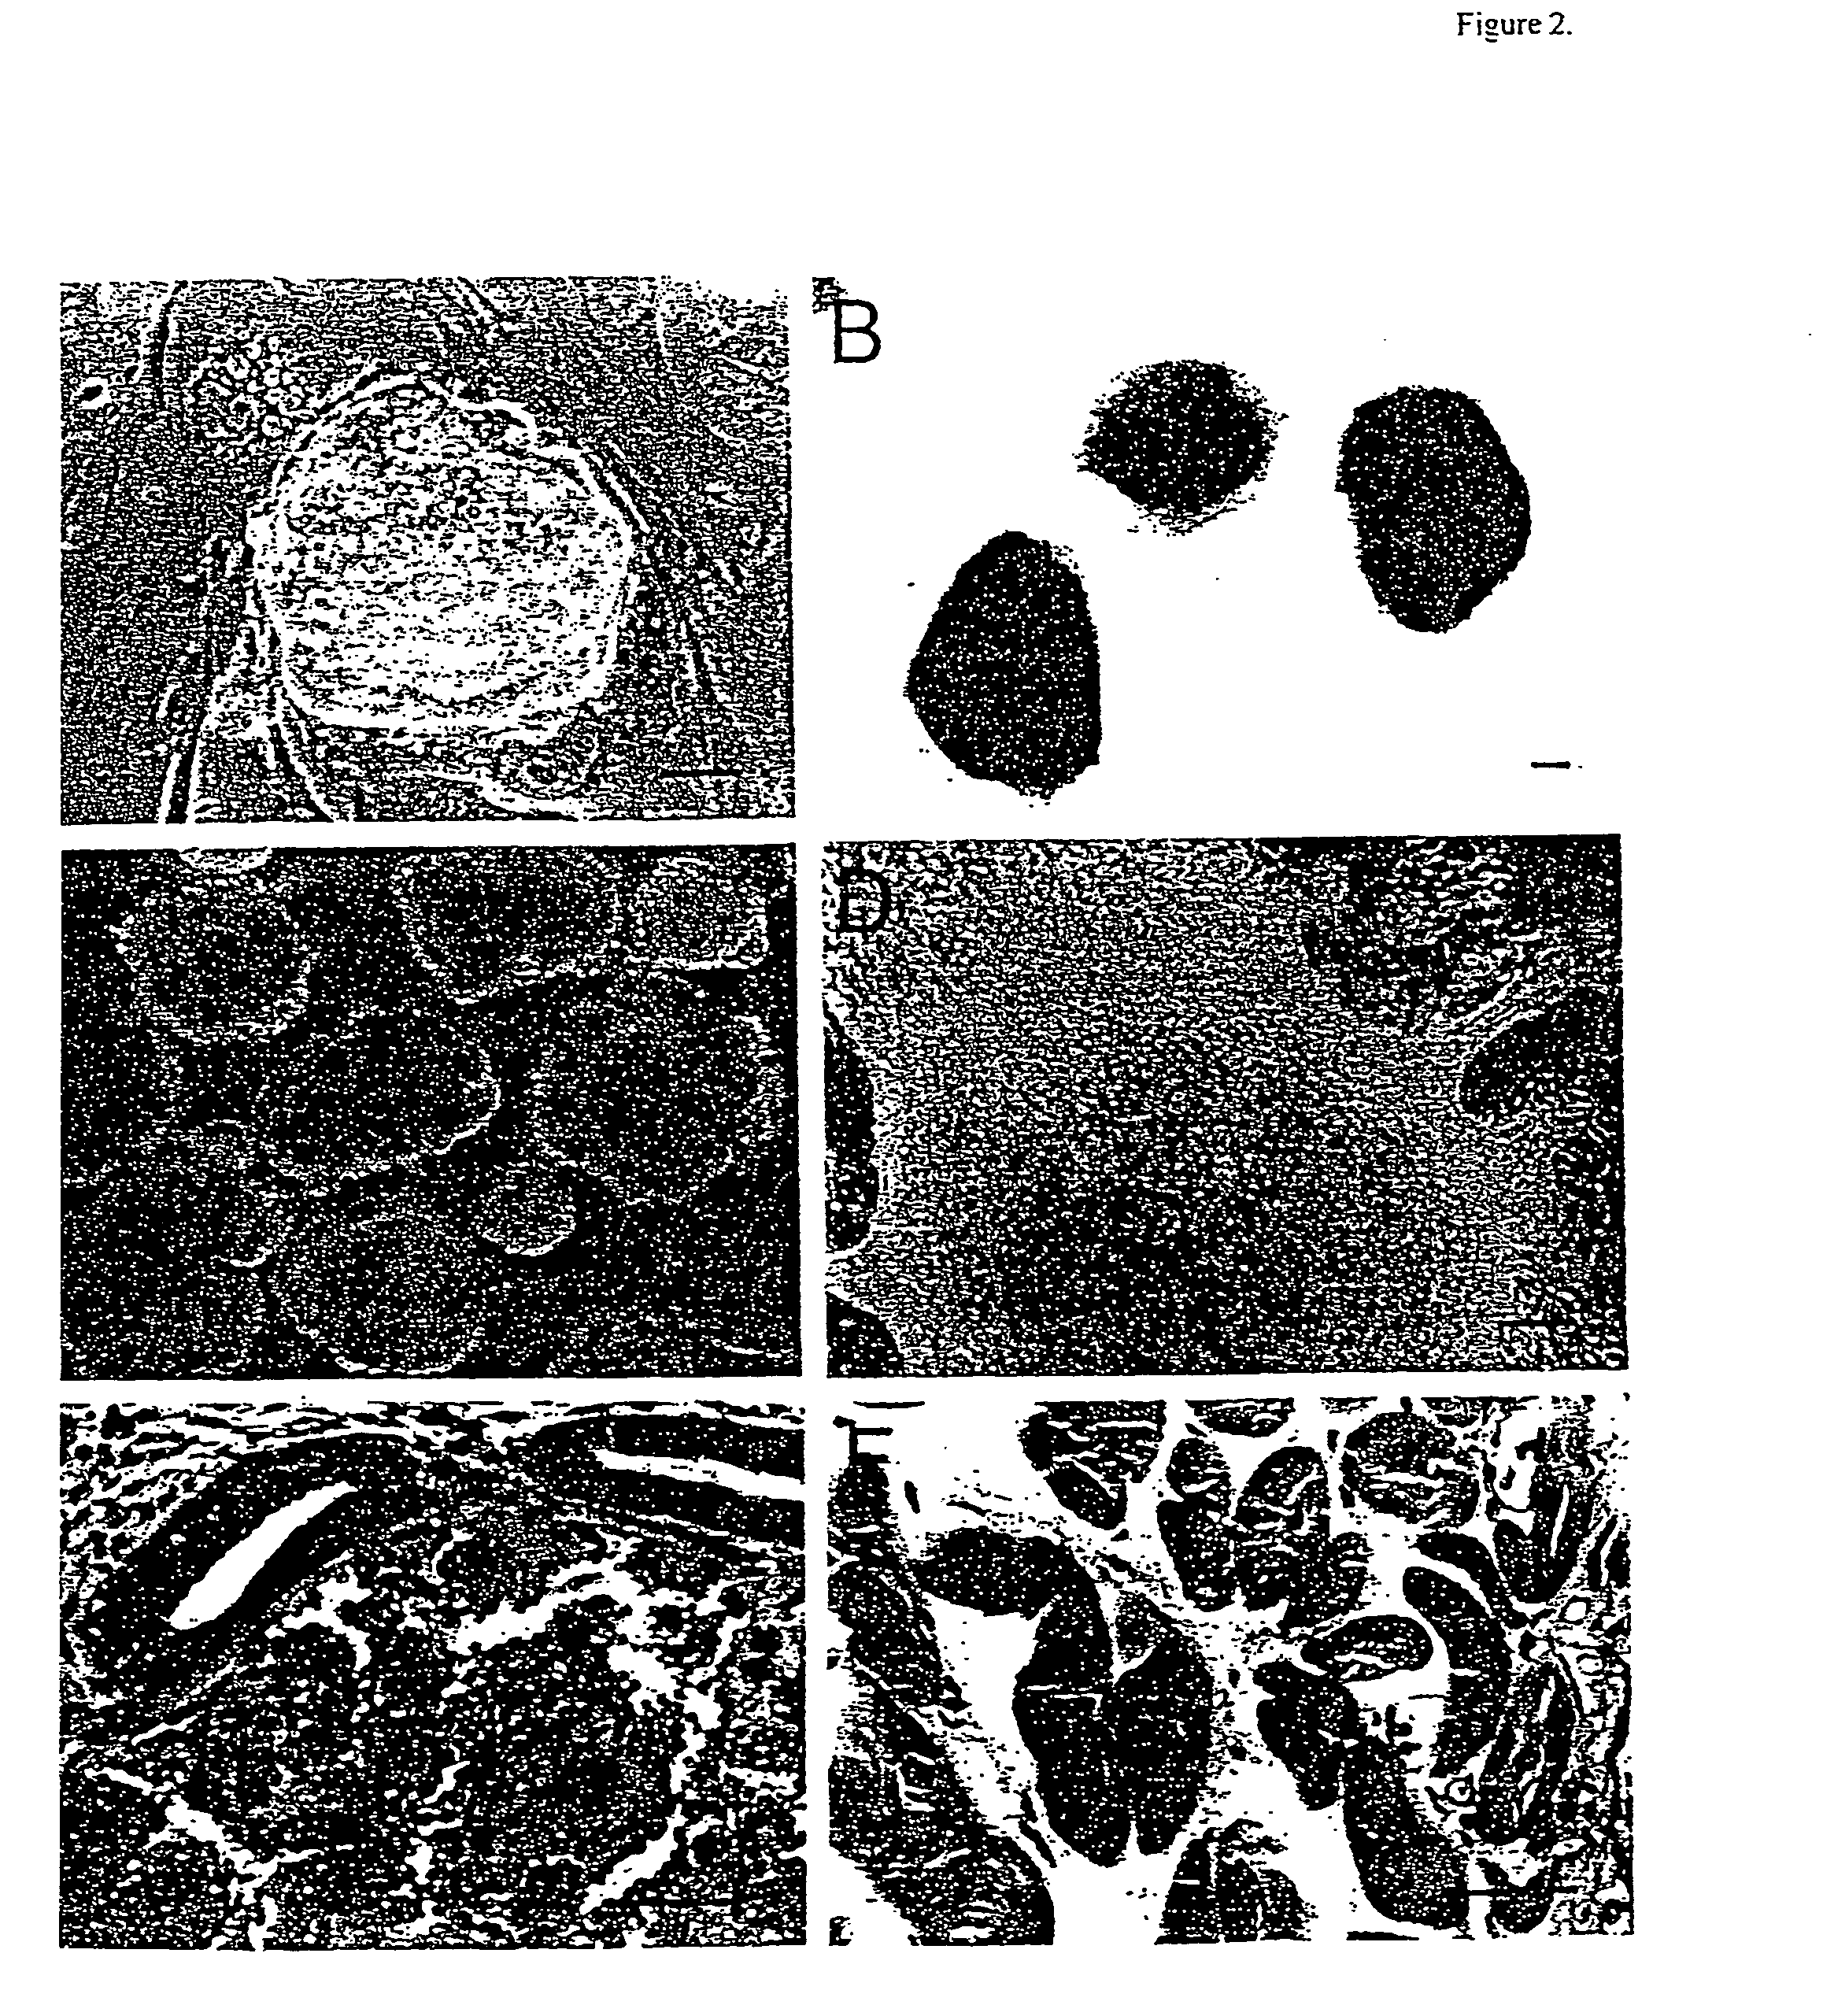 Methods for assaying gene imprinting and methylated cpg islands